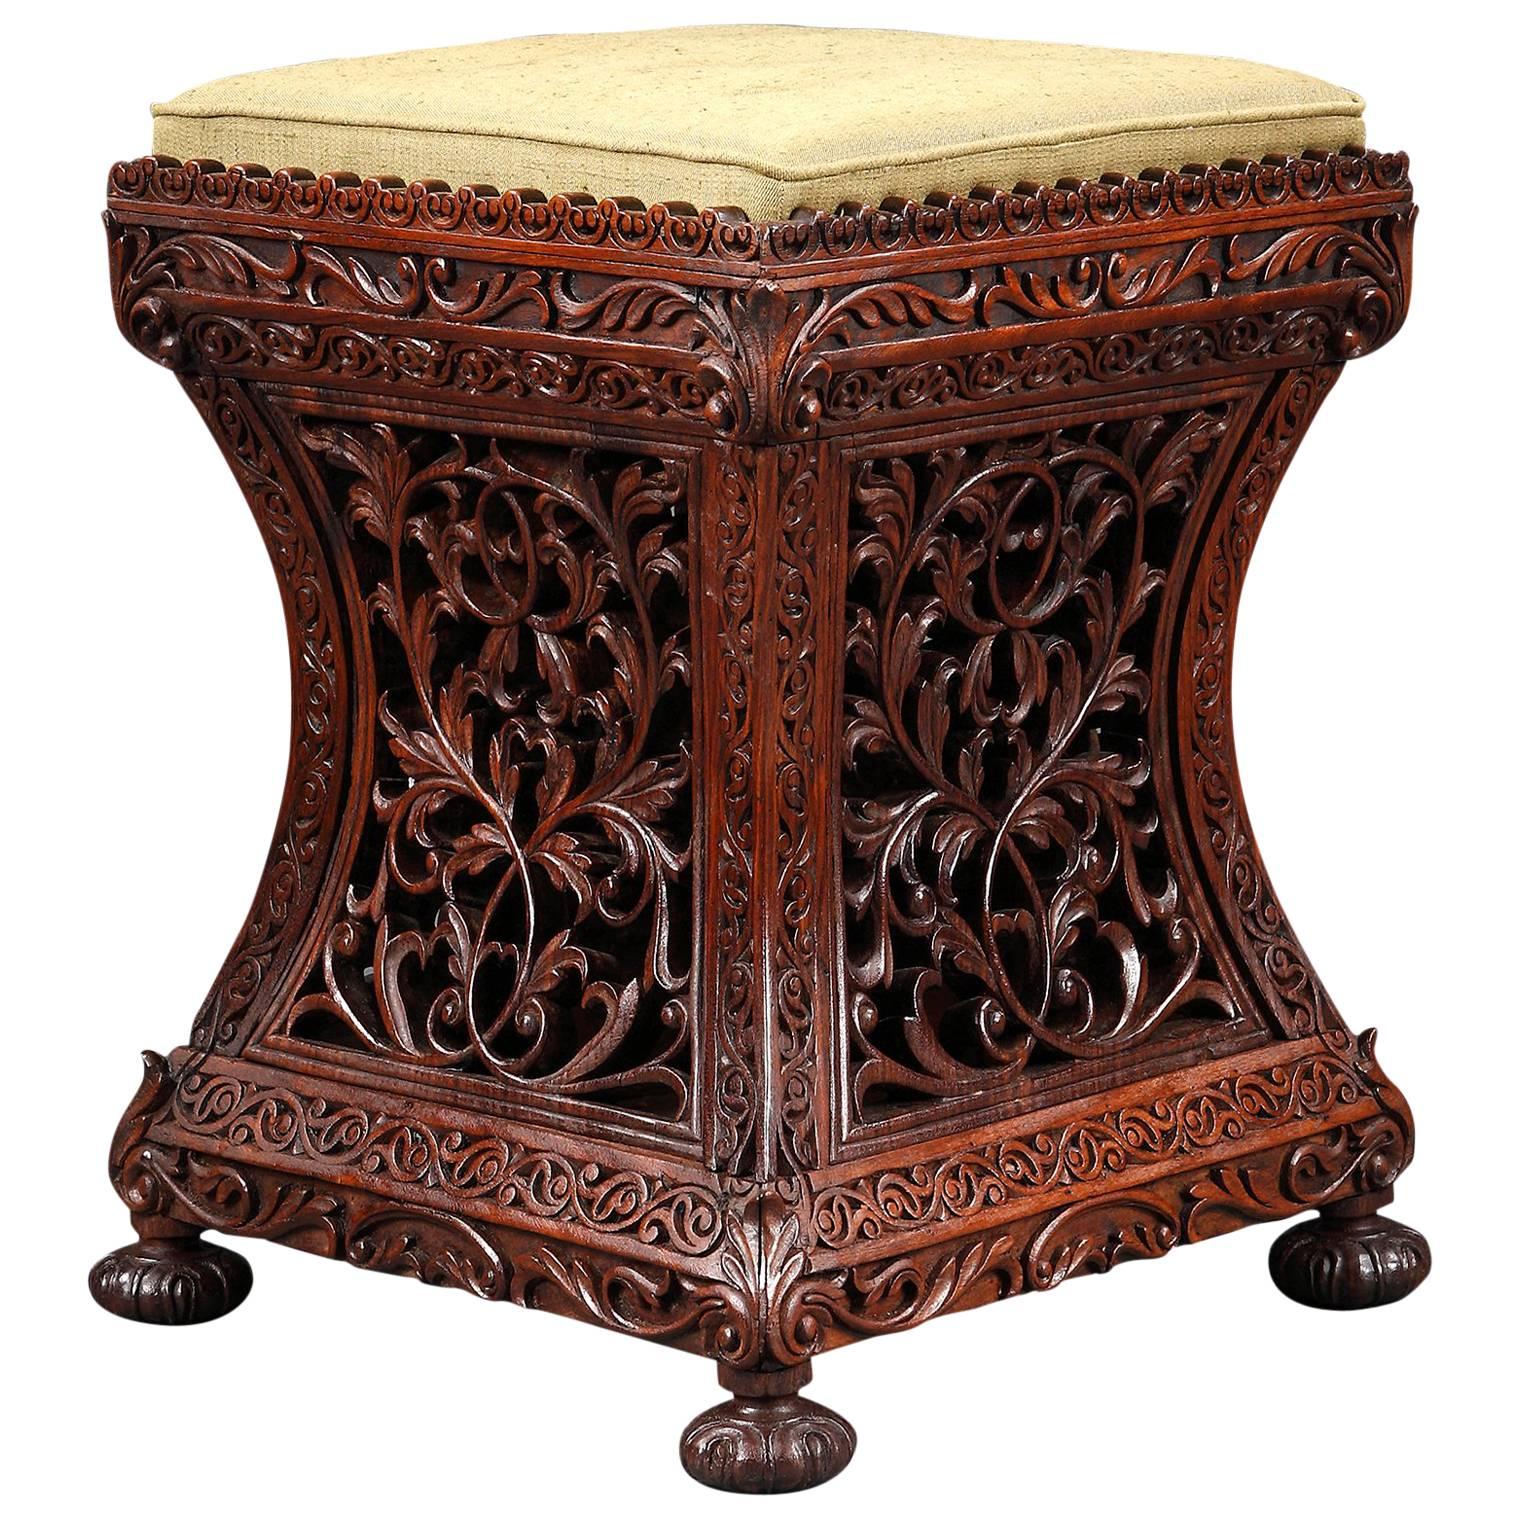 19th Century Anglo-Indian Carved Wood Stool or Seat